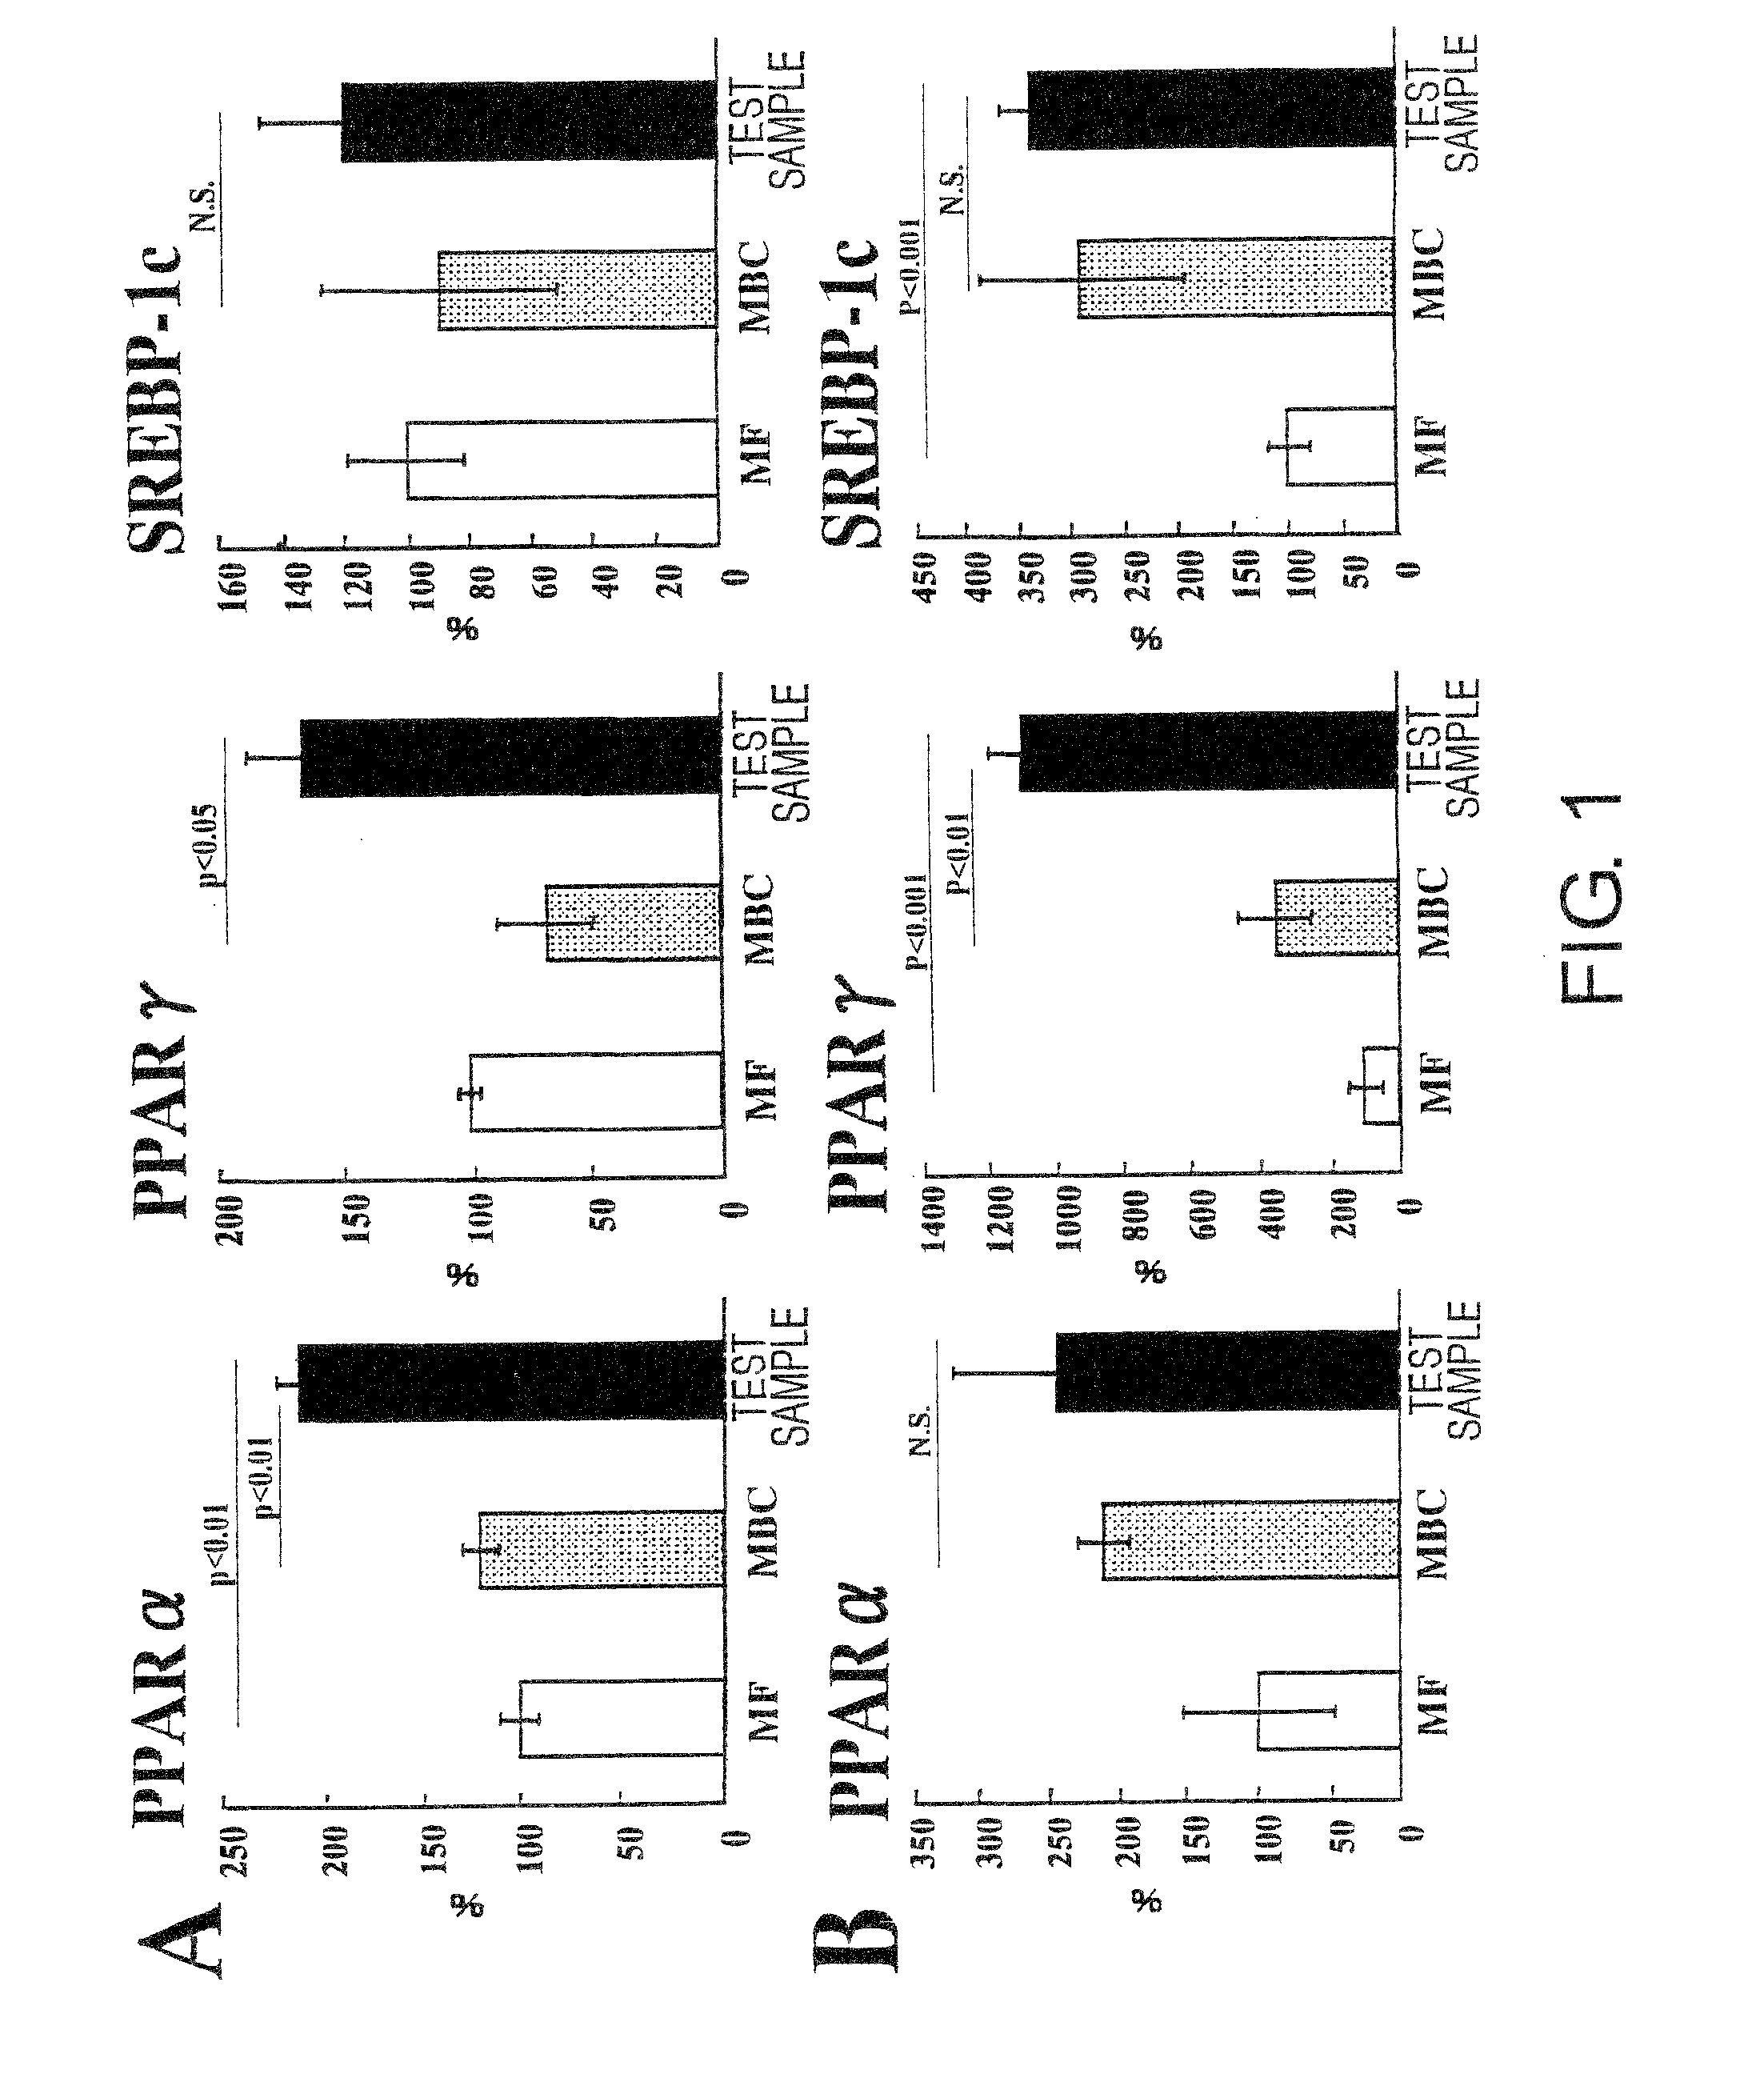 Compositions for Enhancing the Production of PPAR and/or PPAR-Associated Factors